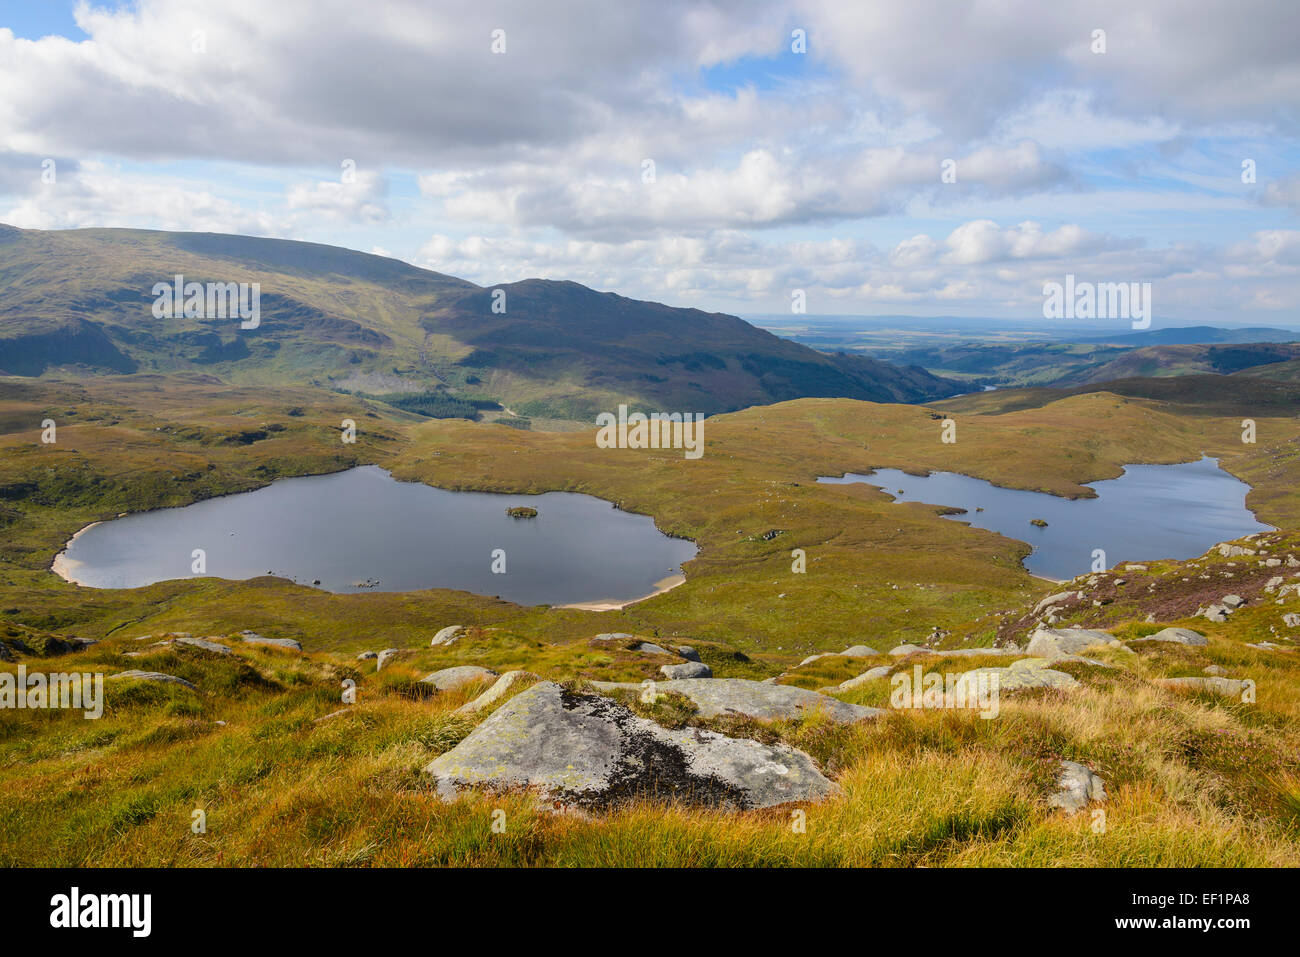 View over the Glenhead Lochs from Rig of the Jarkness, Galloway Hills, Dumfries & Galloway, Scotland Stock Photo